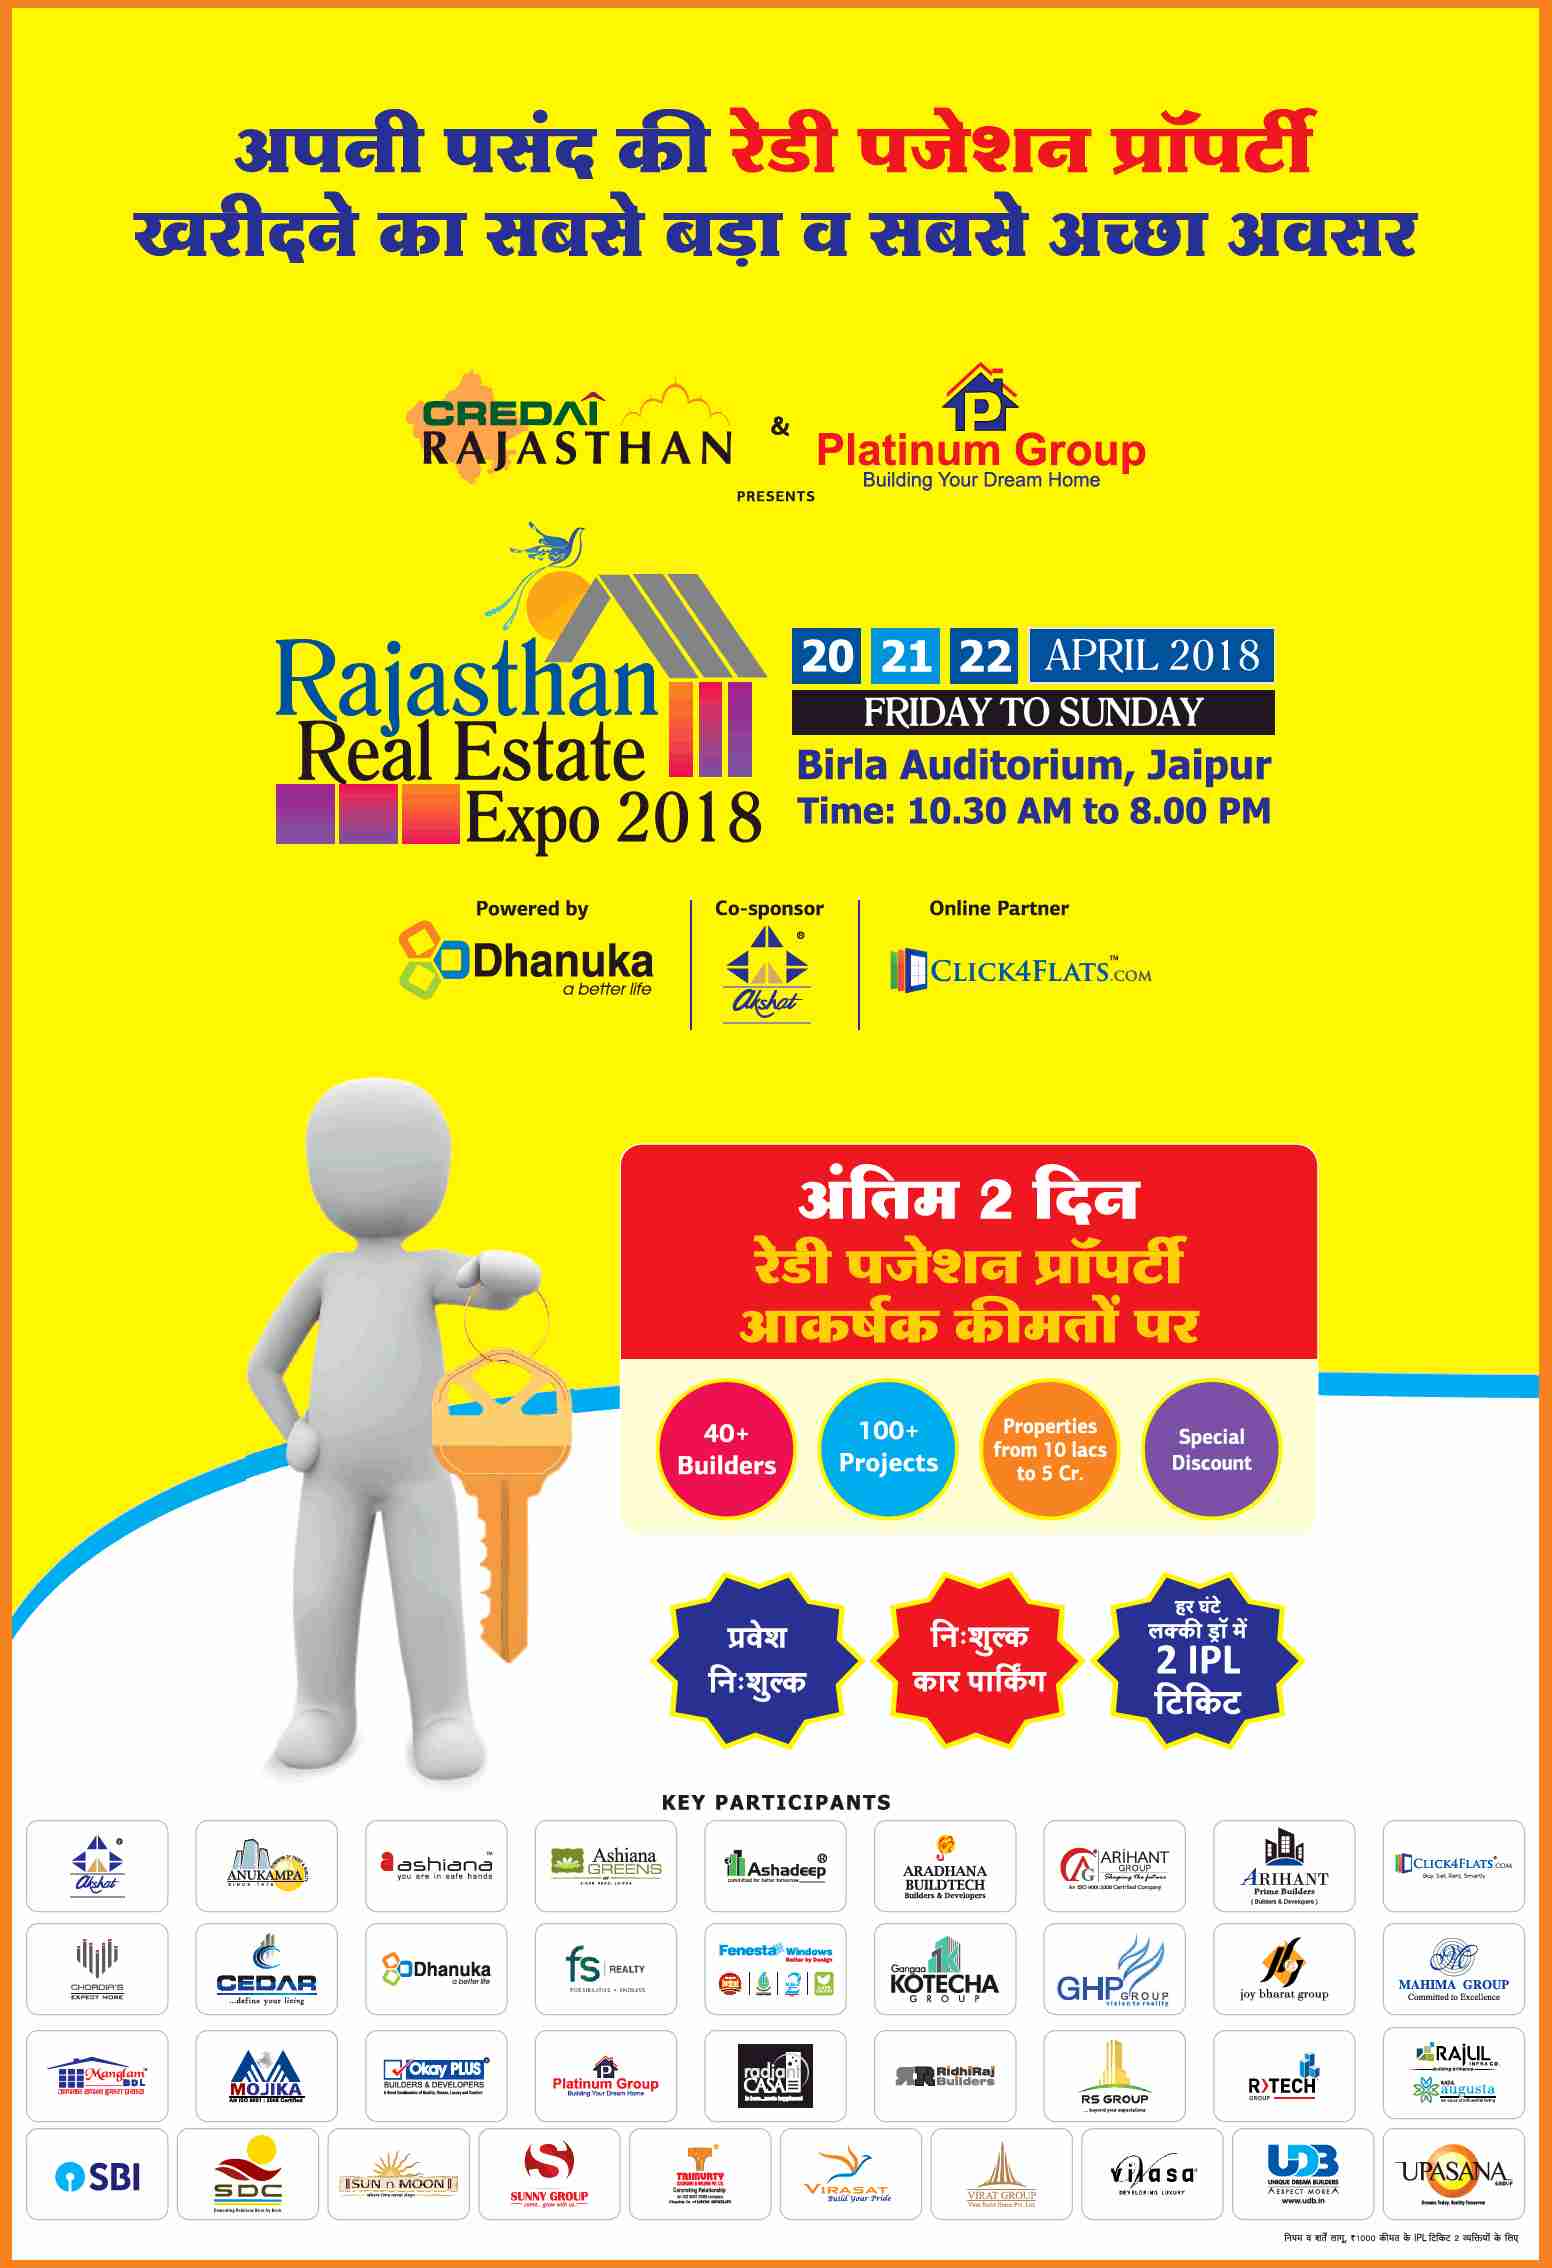 Rajasthan Real Estate Expo 2018 Update